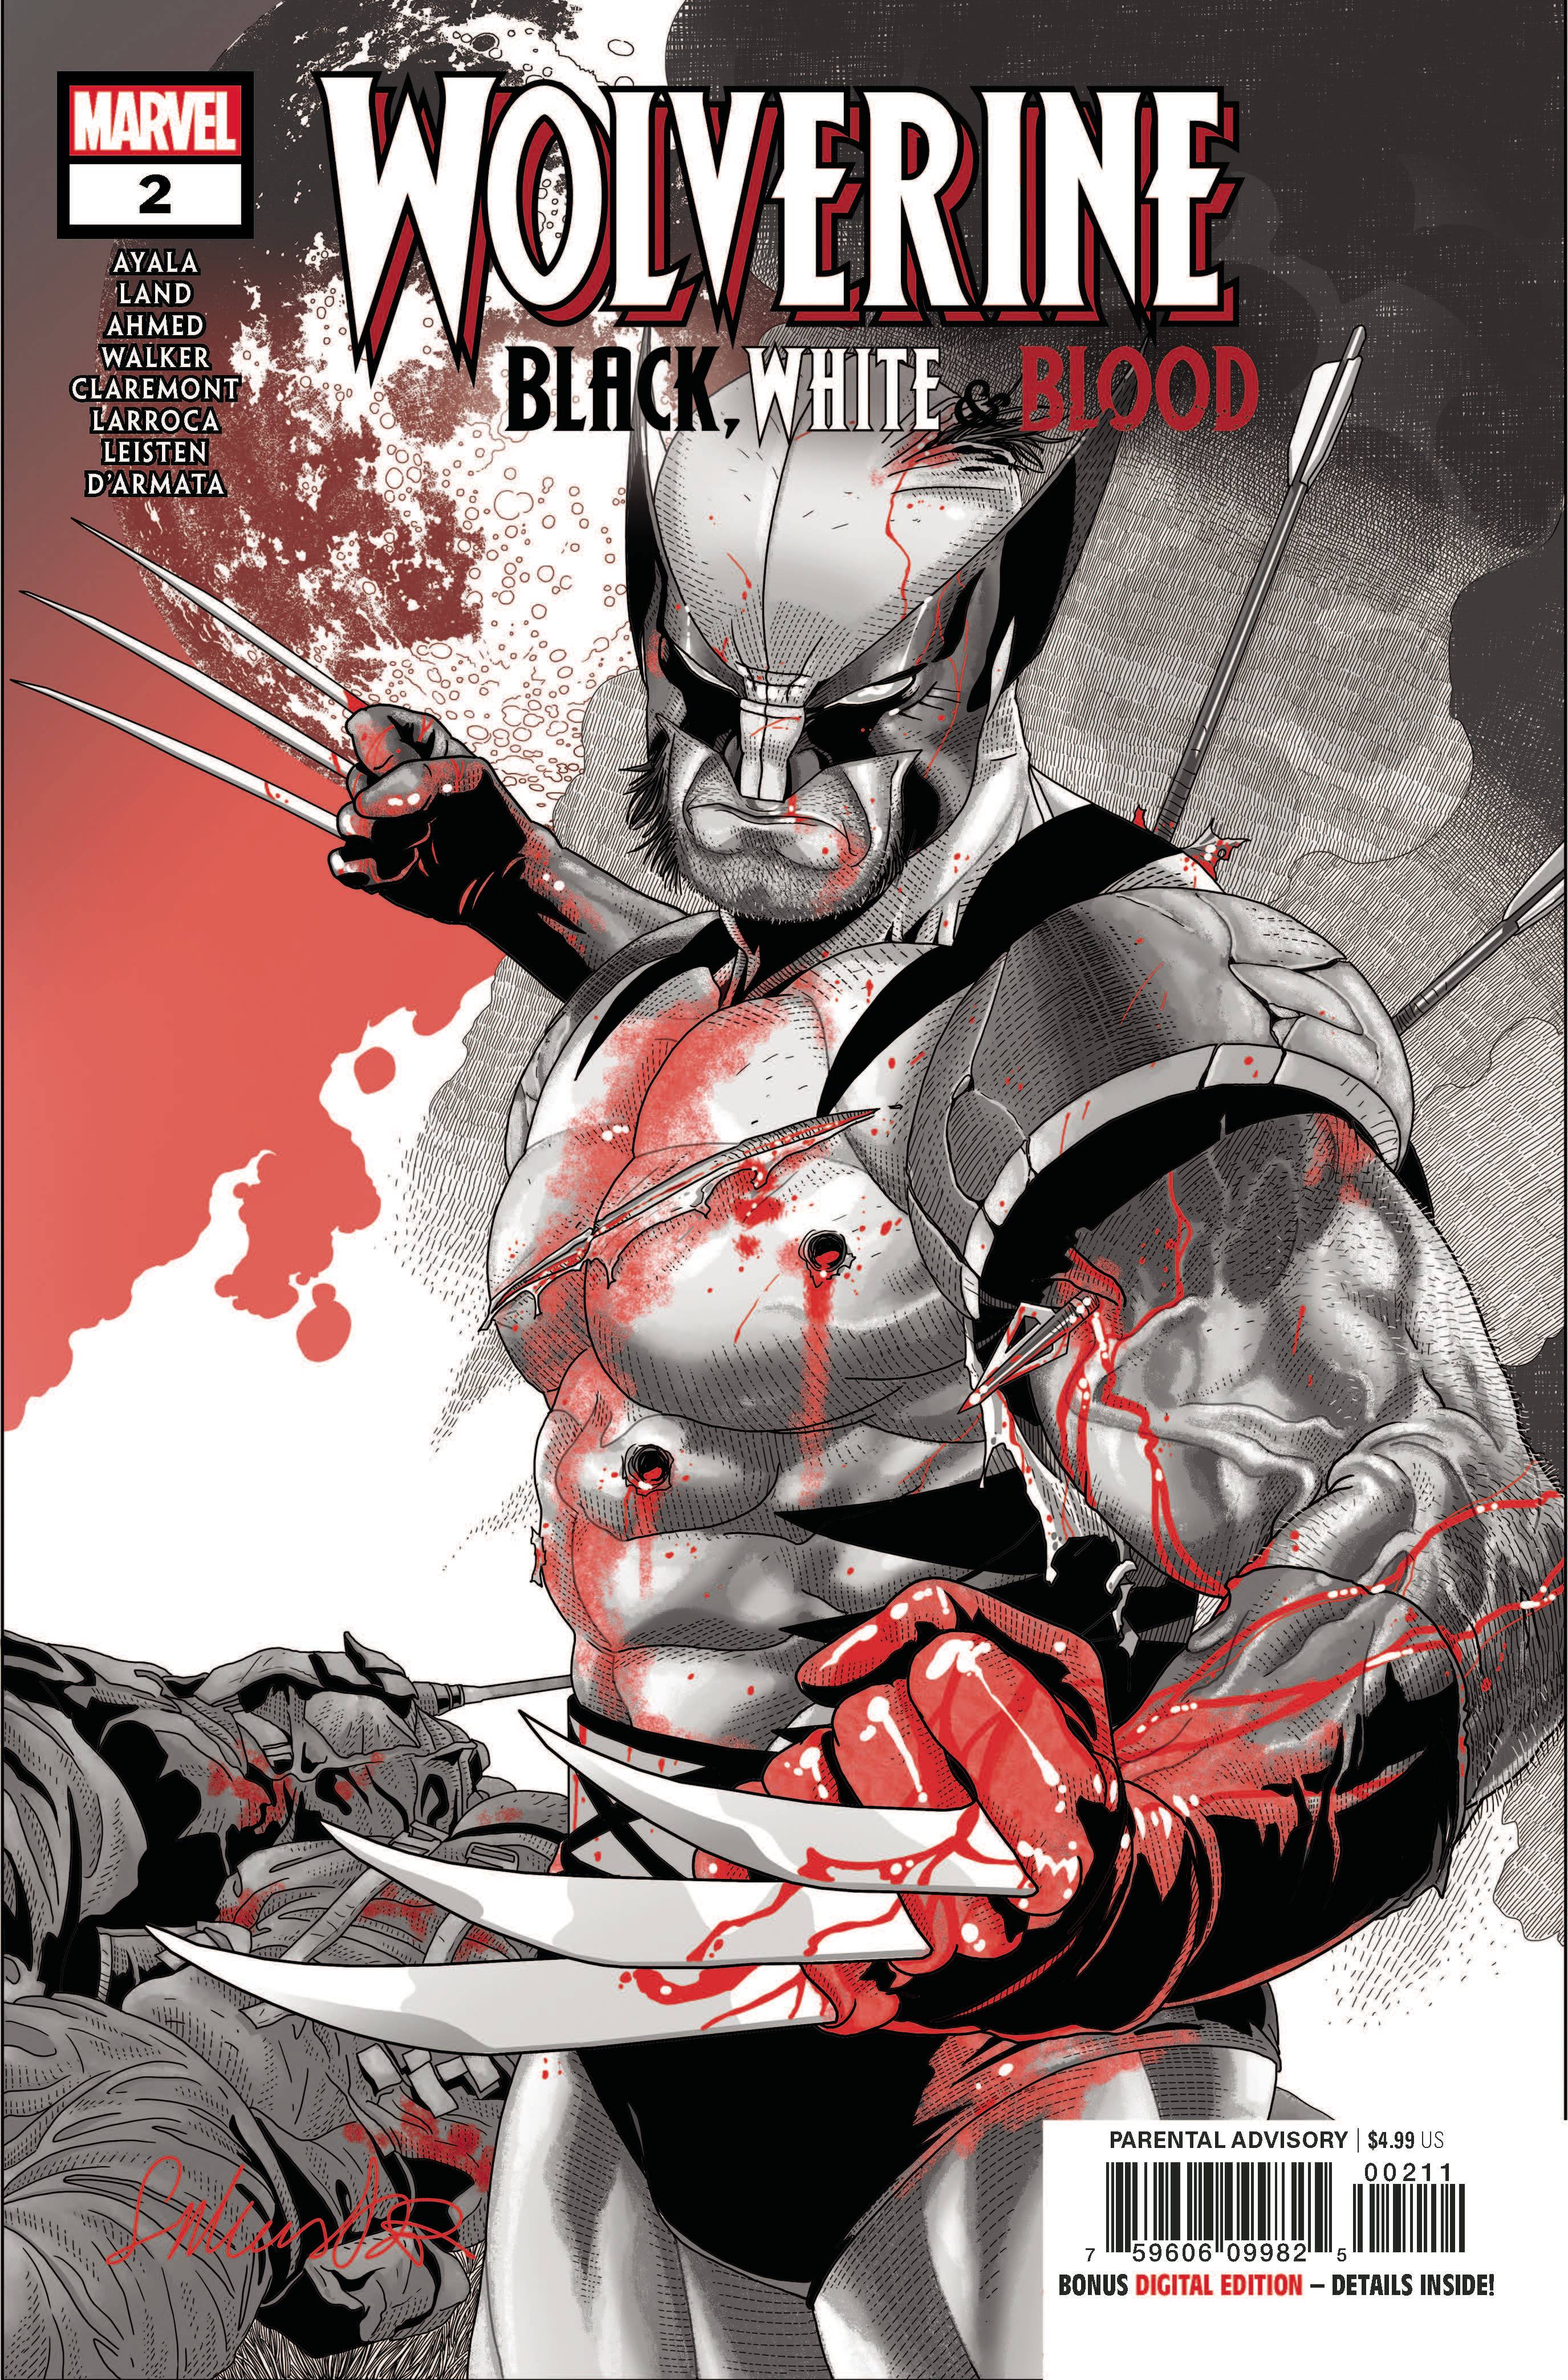 Wolverine: Black, White, and Blood #2 (2020)